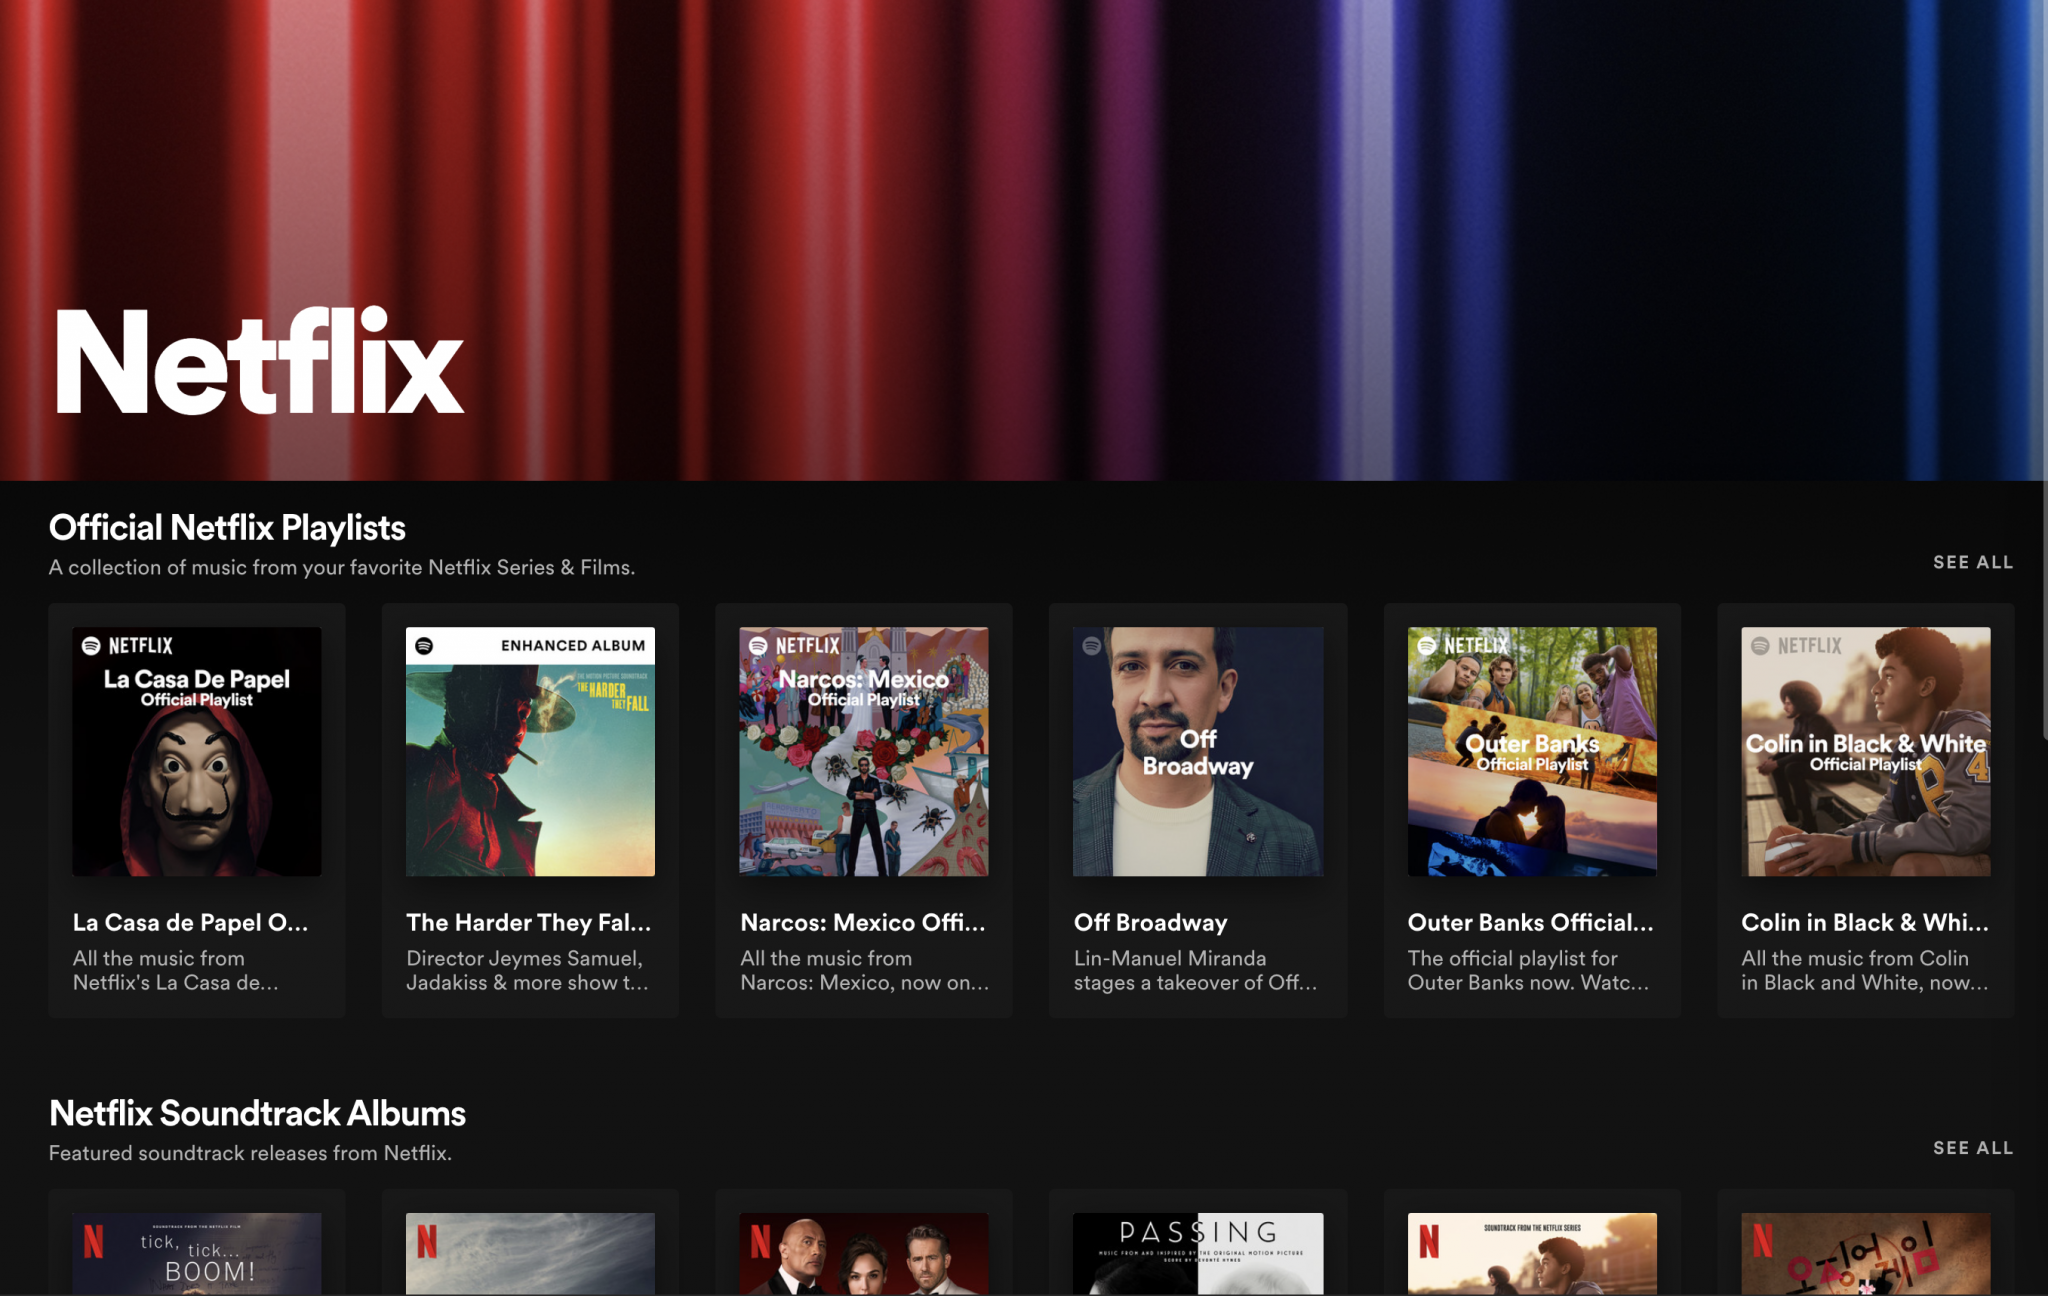 Spotify Debuts A Netflix Hub Featuring Music And Podcasts Tied To Netflix Shows And Movies Techcrunch